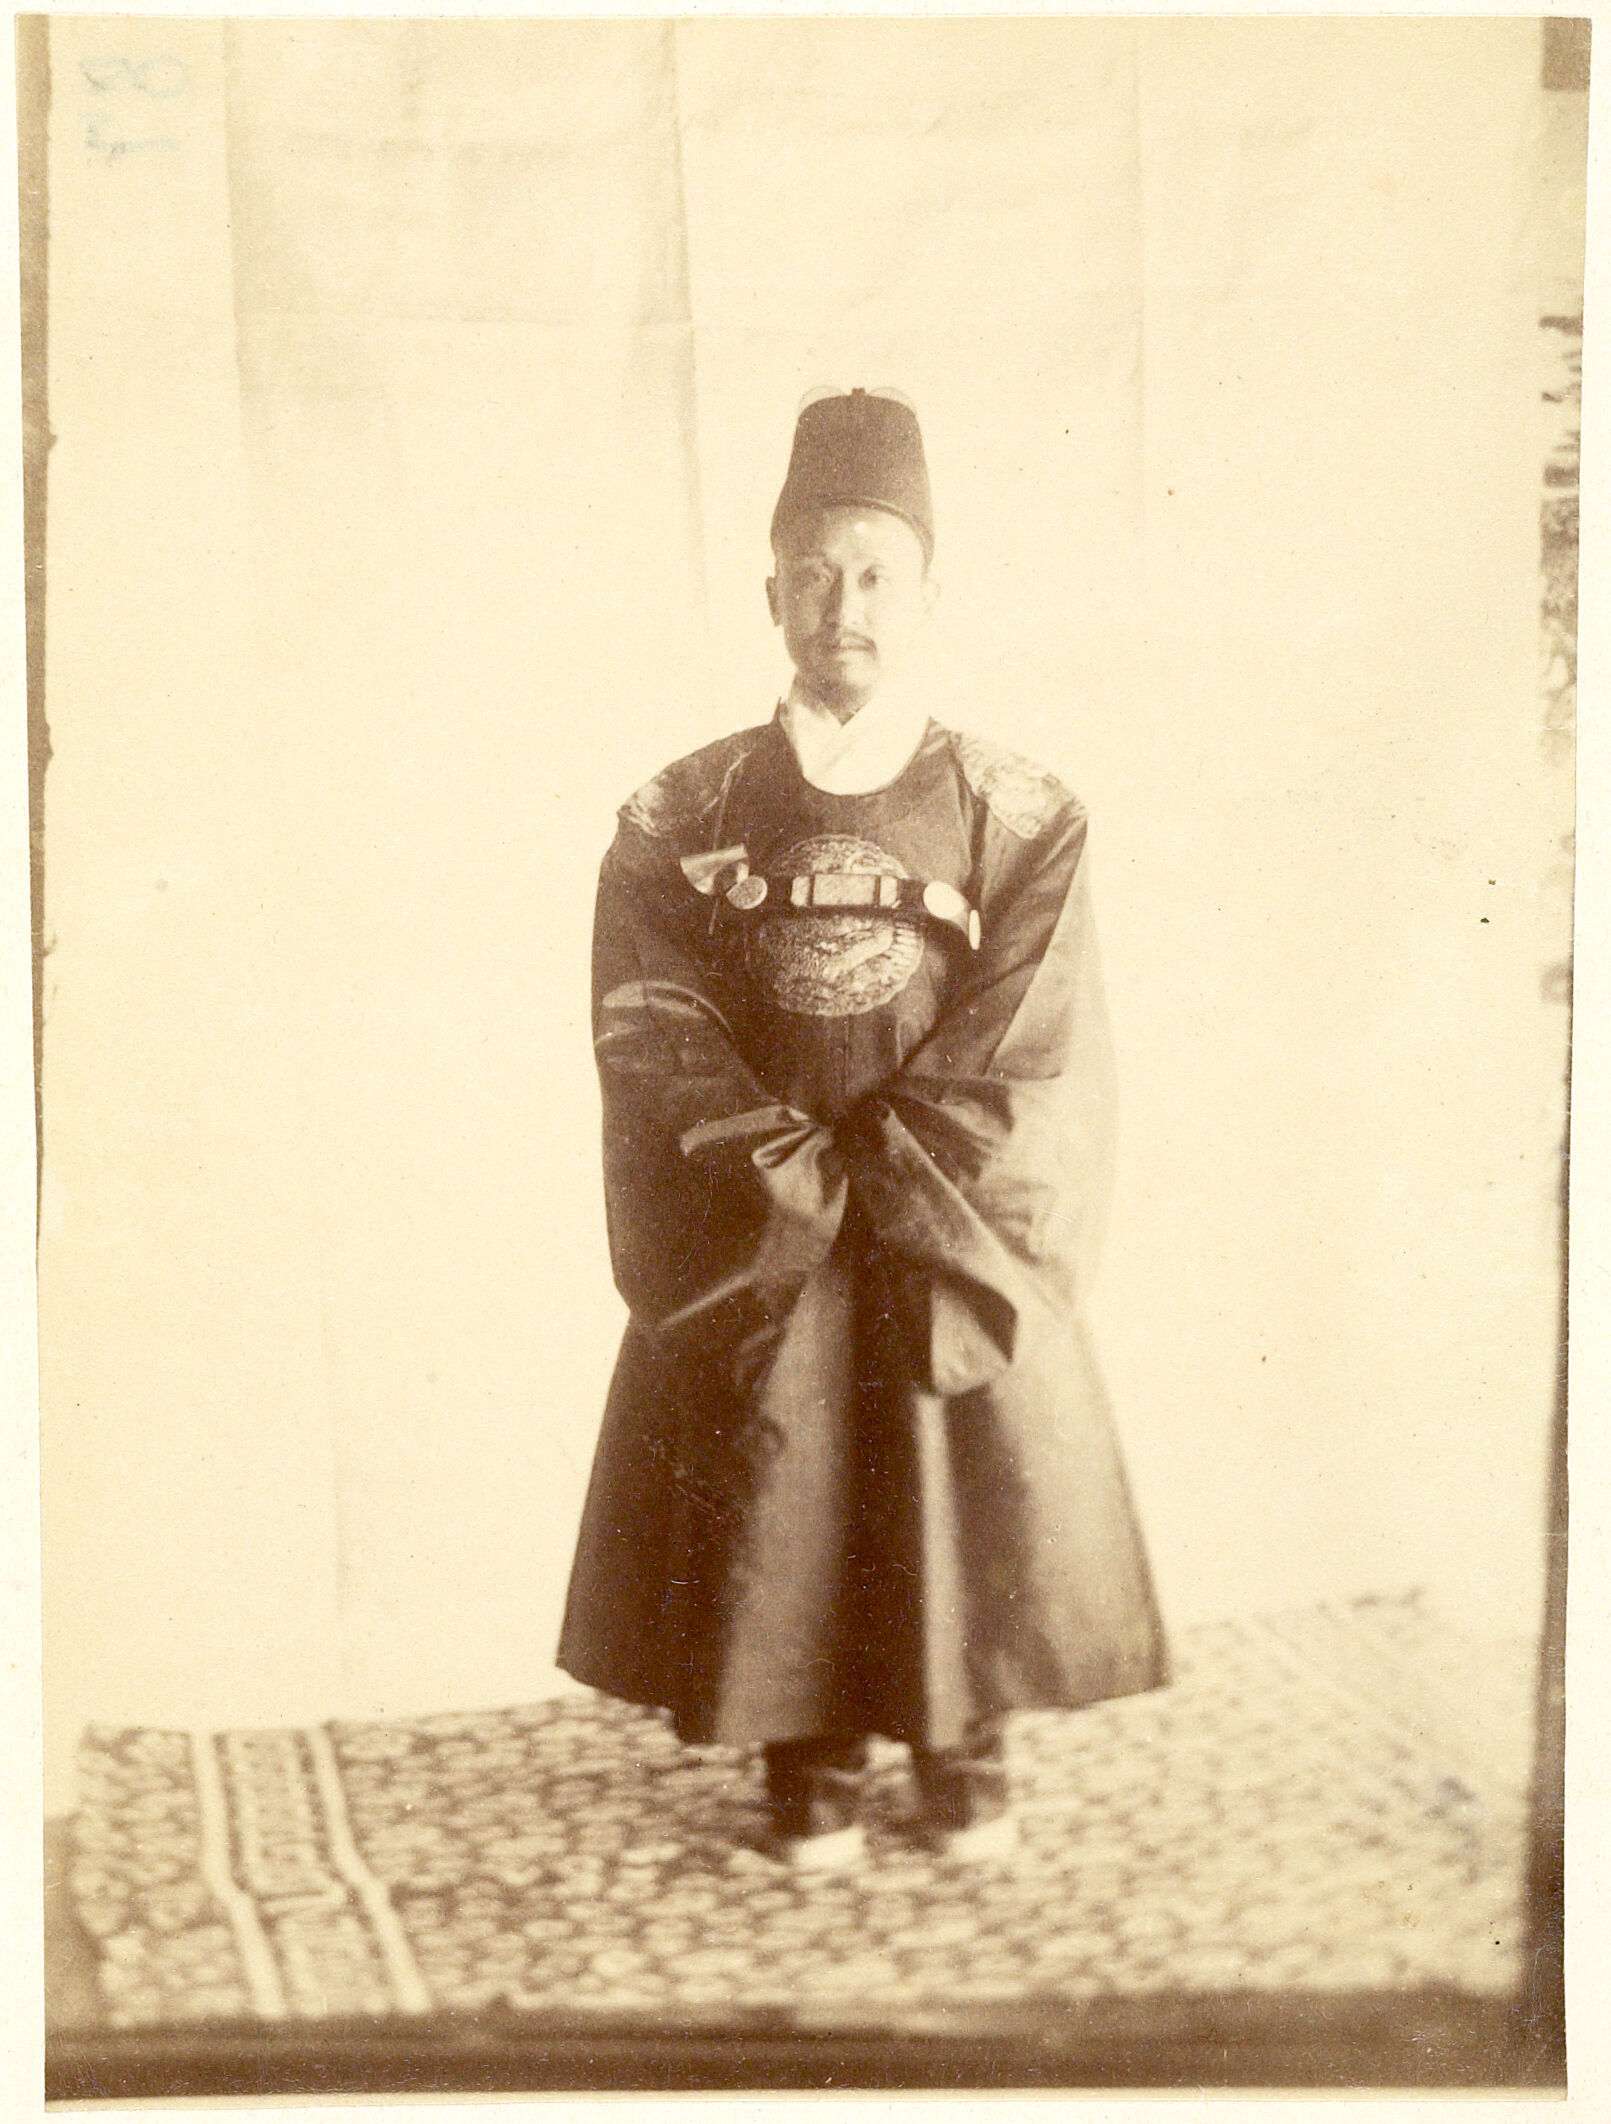 Portrait Photograph Of King Ko-Chong Wearing Royal Robes And Standing On A Carpet